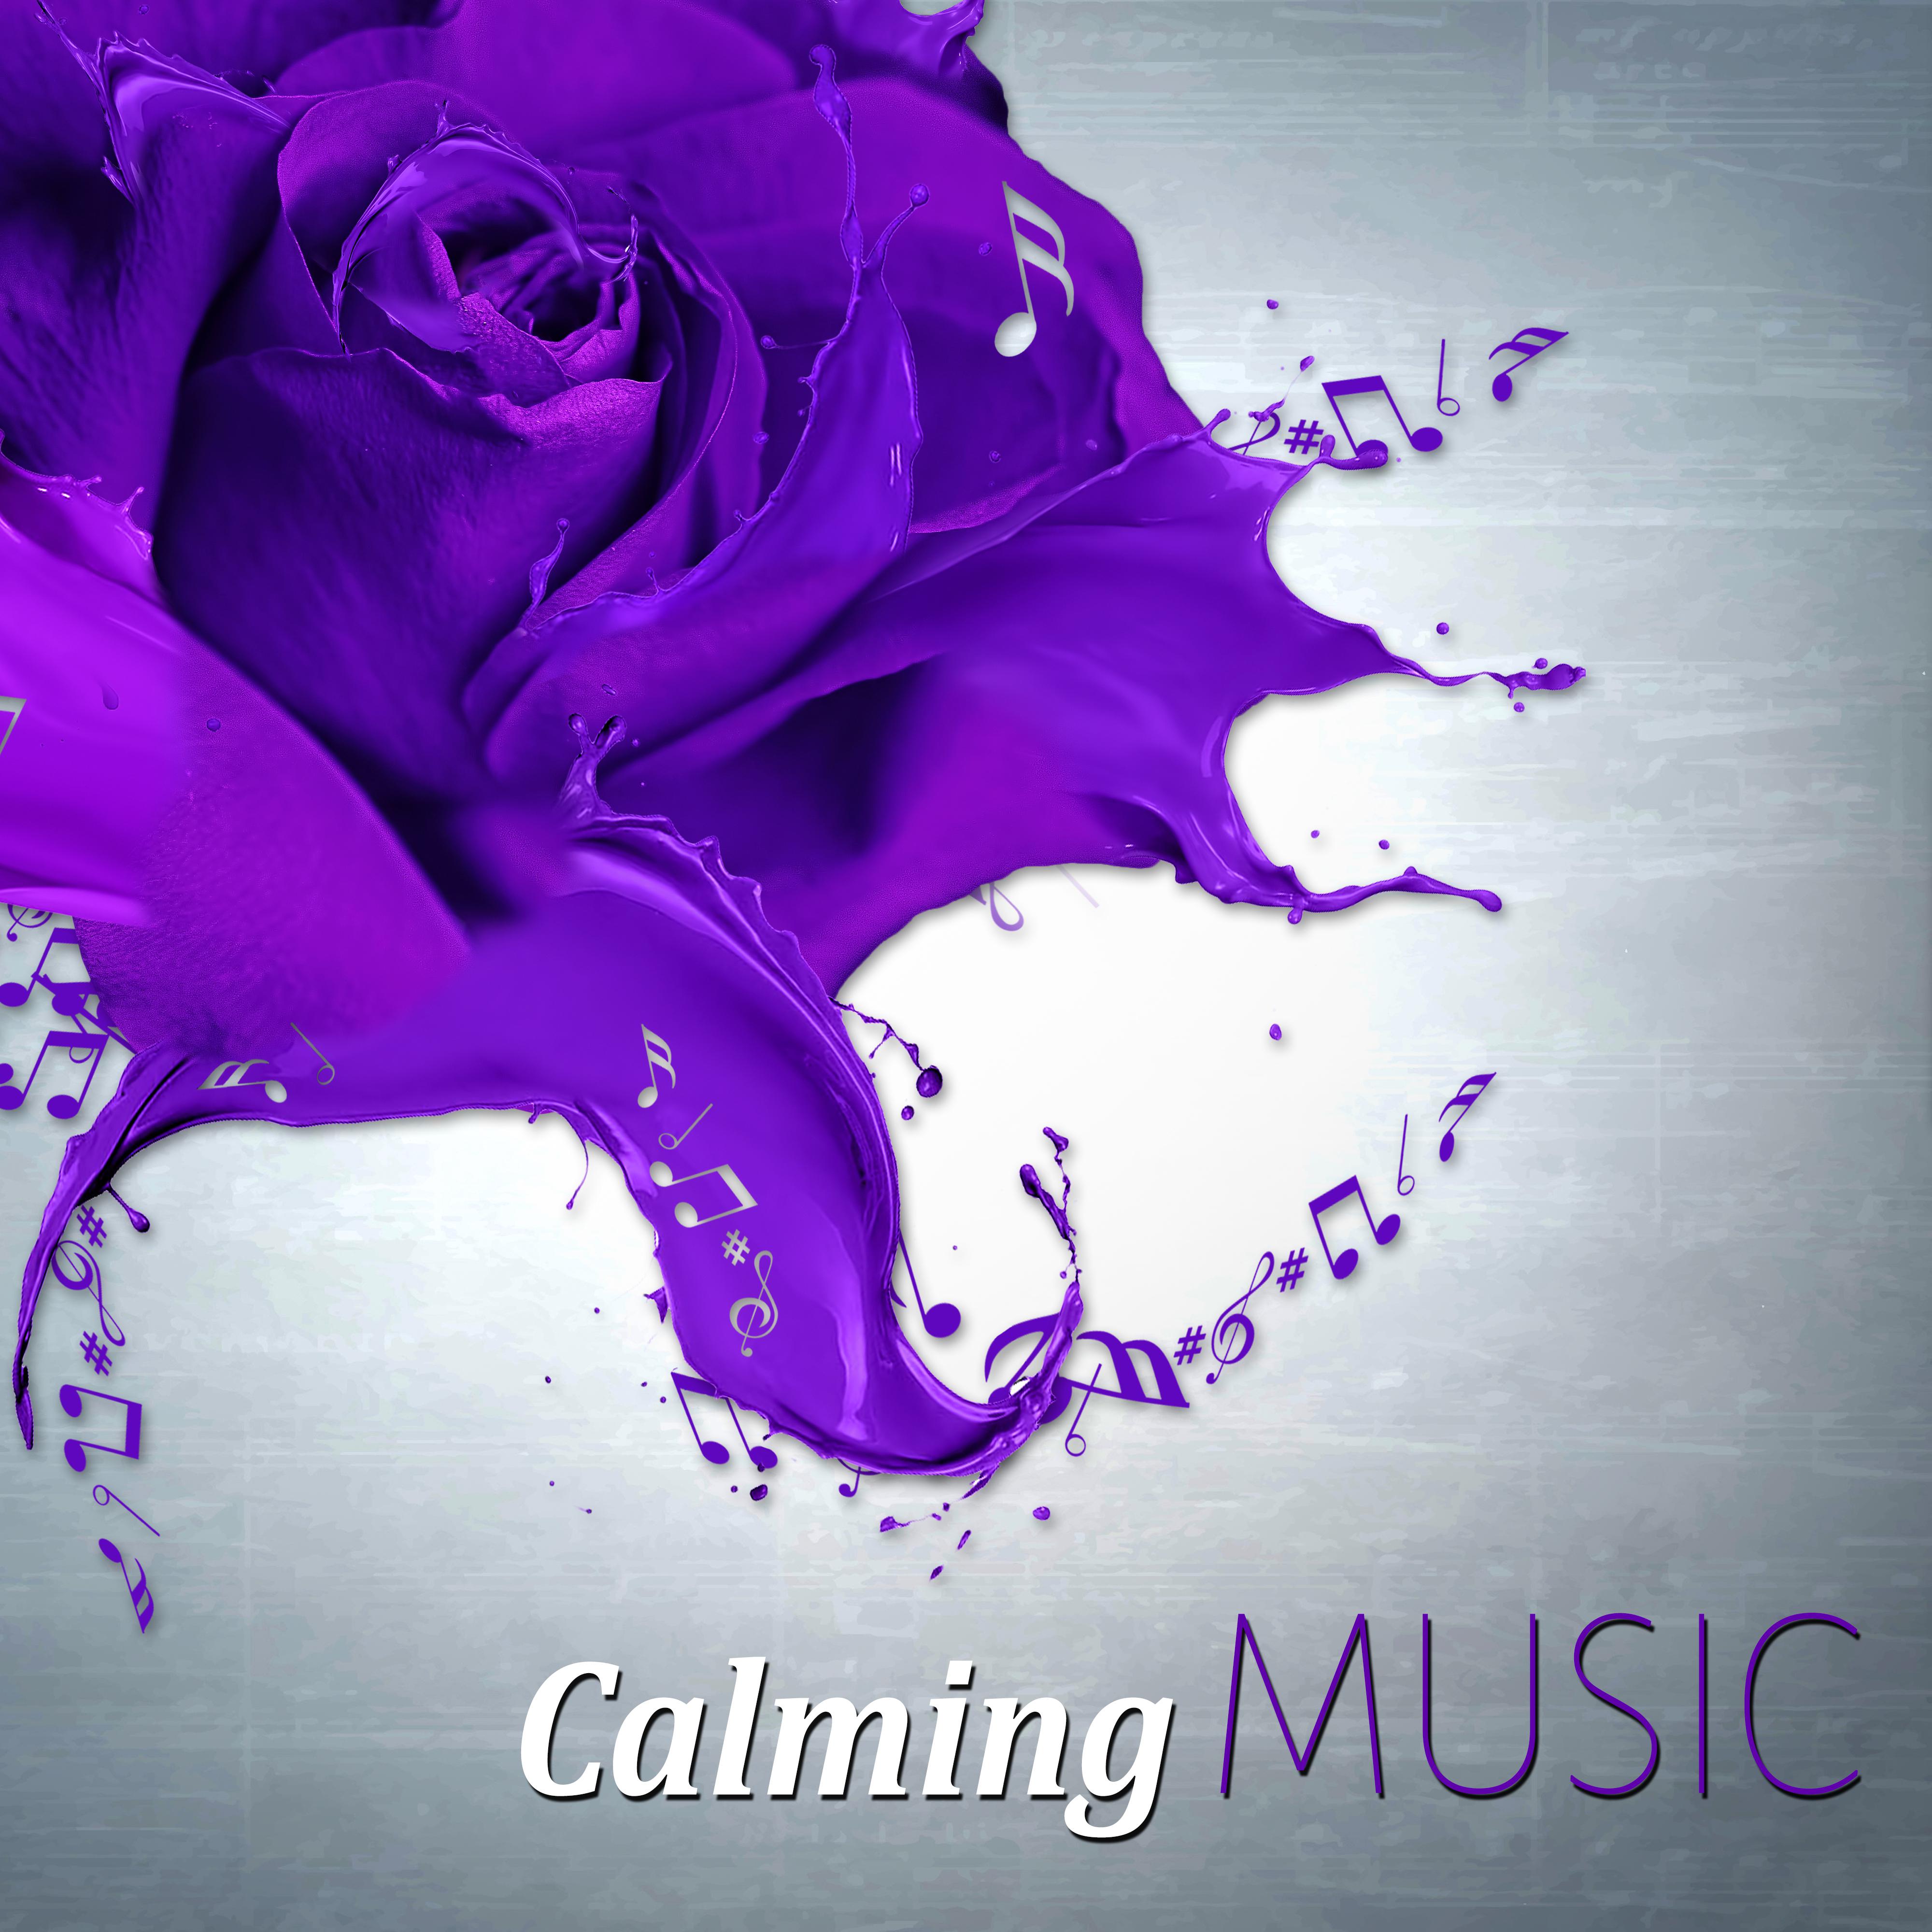 Calming Music - Calming Music, Mindfulness Meditation, Yoga Poses, Spiritual Healing, Relaxing Music, Massage Therapy, Chill Out Music, Serenity Spa